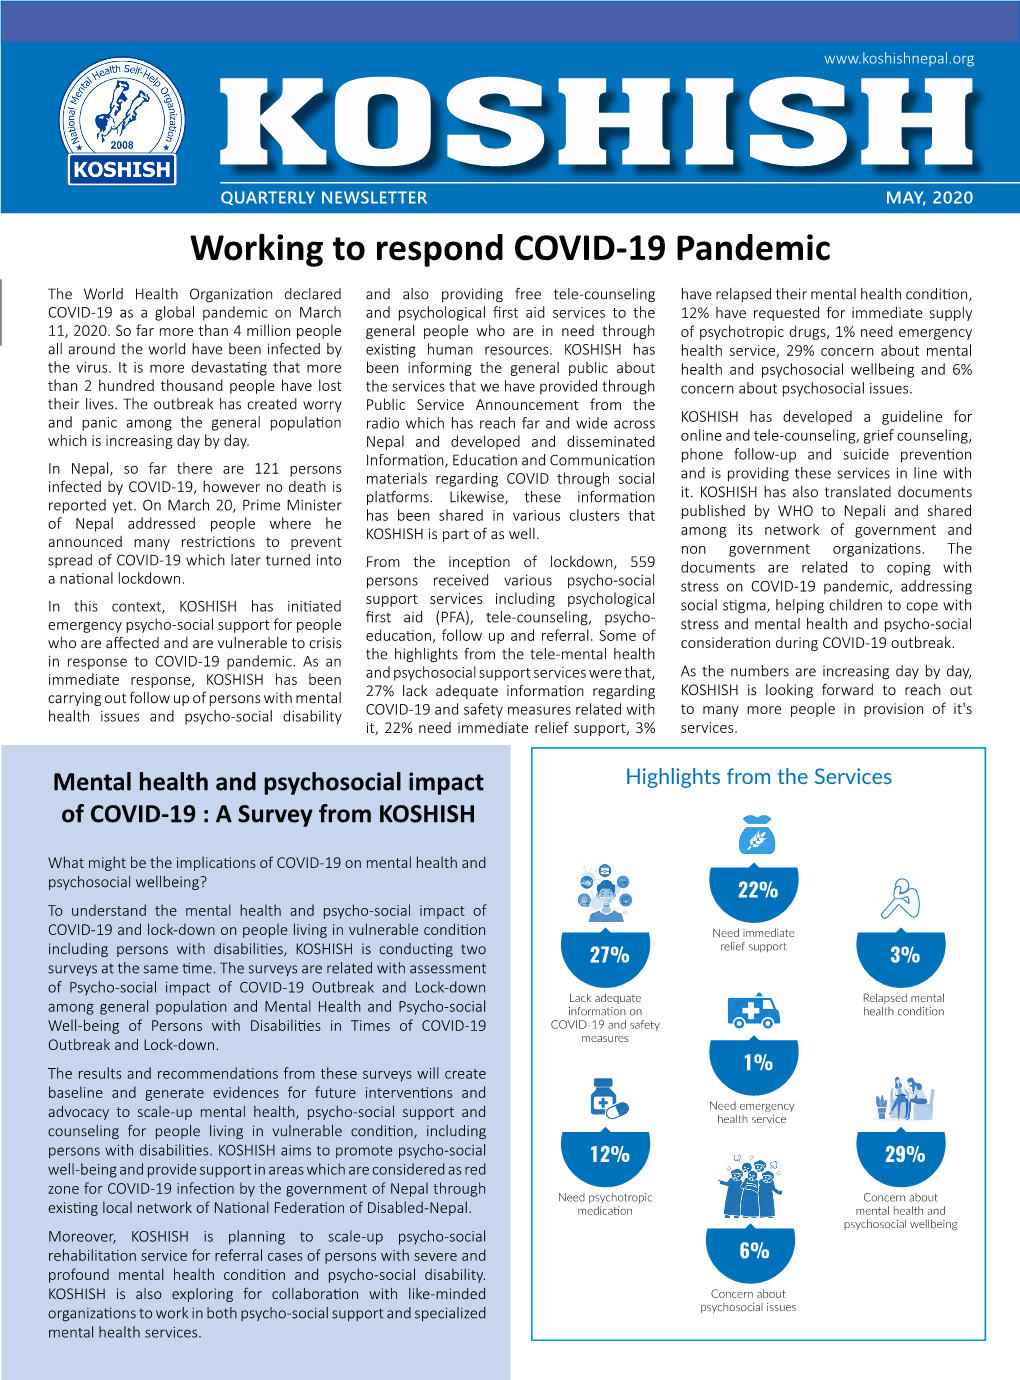 Working to Respond COVID-19 Pandemic